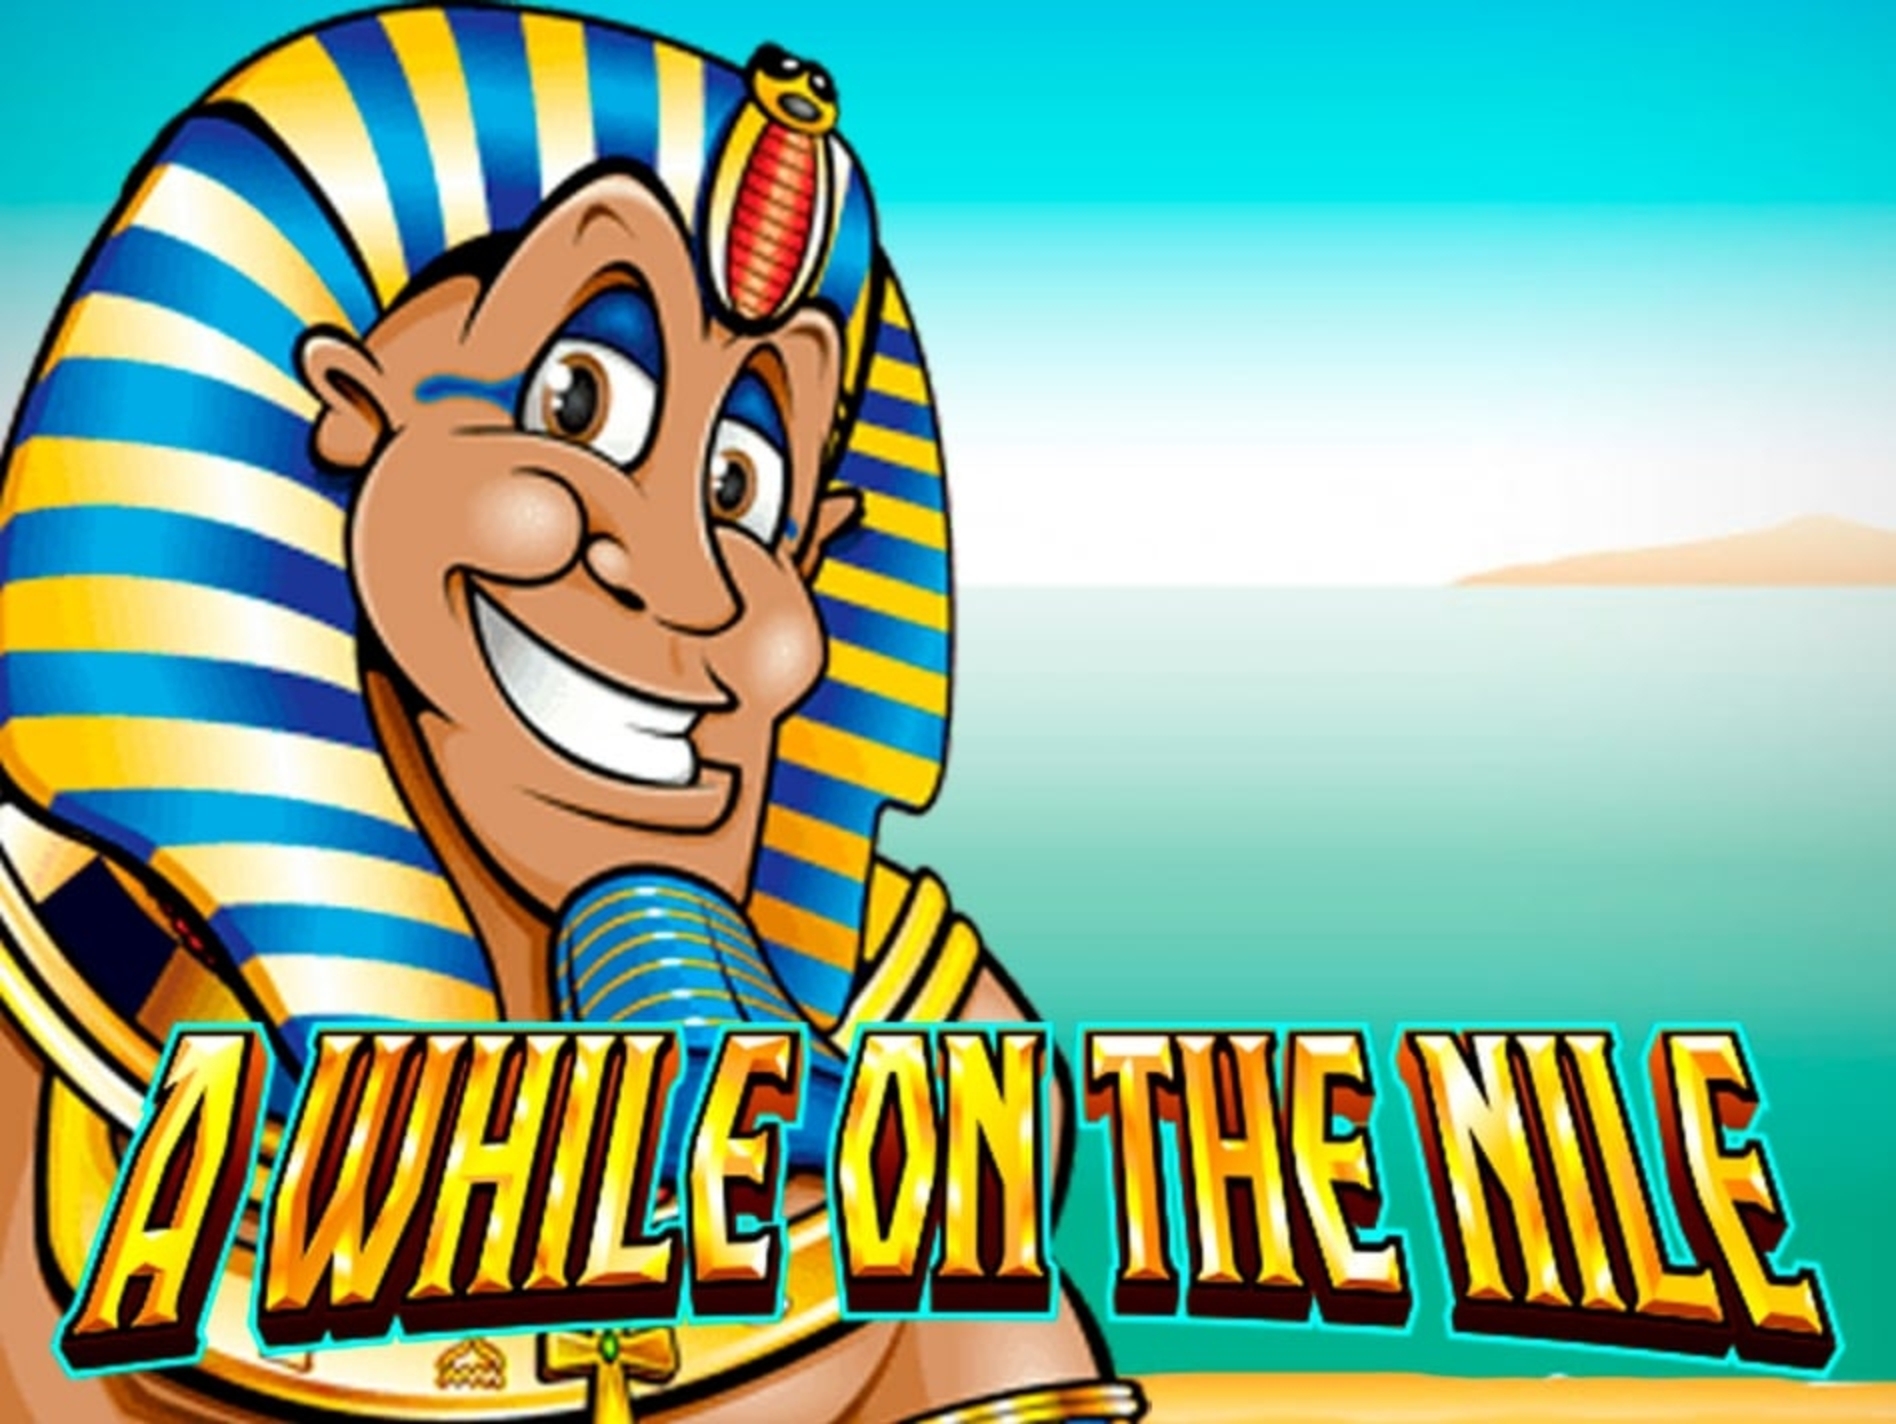 A While On The Nile demo